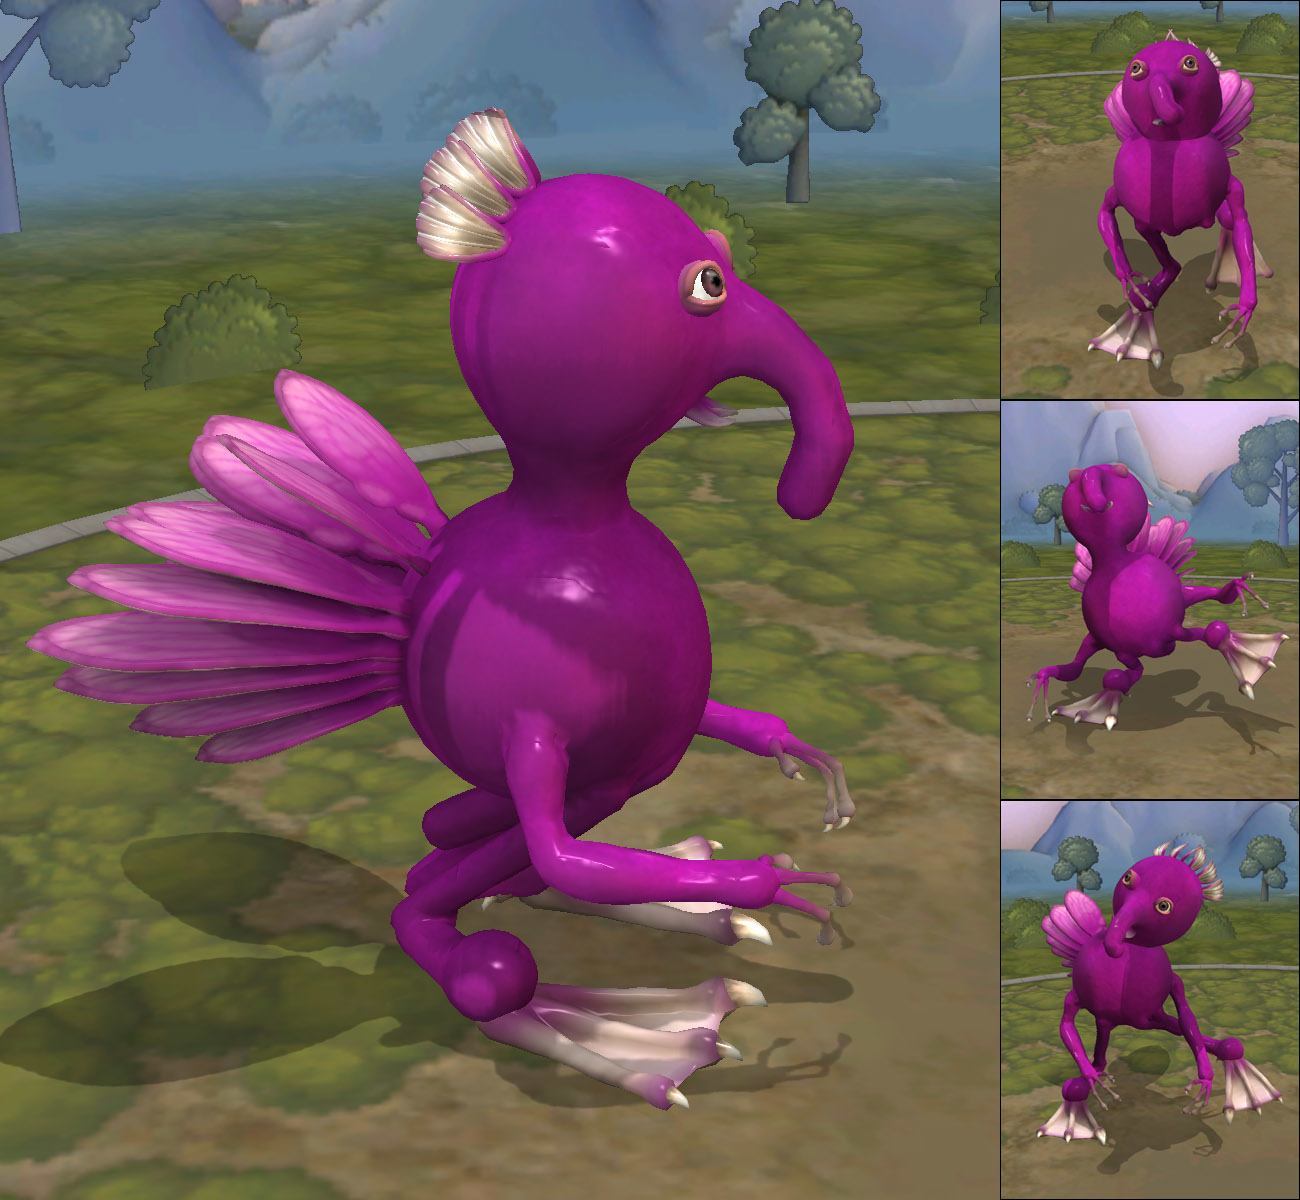 download spore for free-2017-quick link